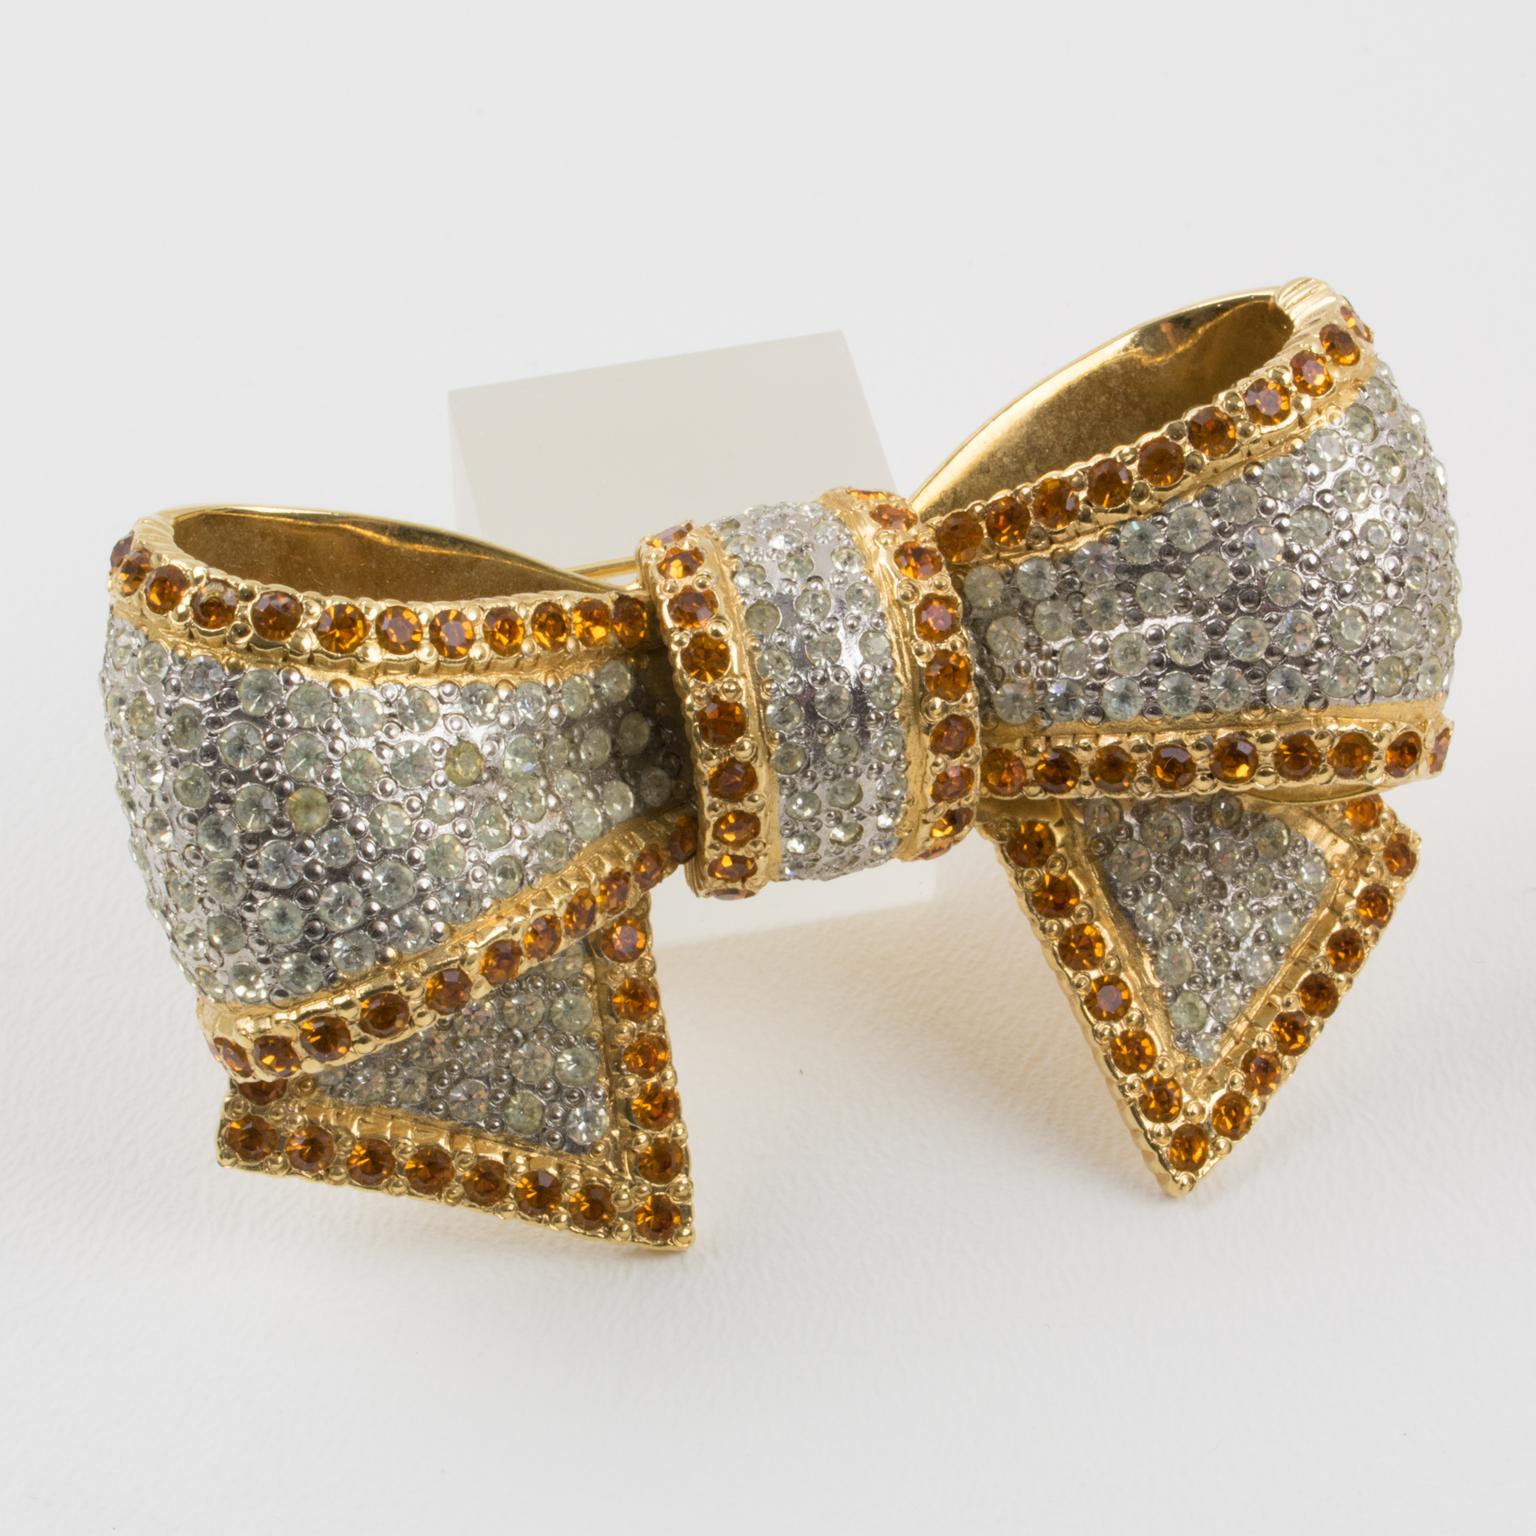 Exquisite Valentino Garavani couture pin brooch. Huge dimensional gilt metal bowtie-shape all paved with tiny crystal rhinestones in assorted colors of clear and topaz. Security closing clasp. Valentino hallmark underside.
Measurements: 3 in. wide